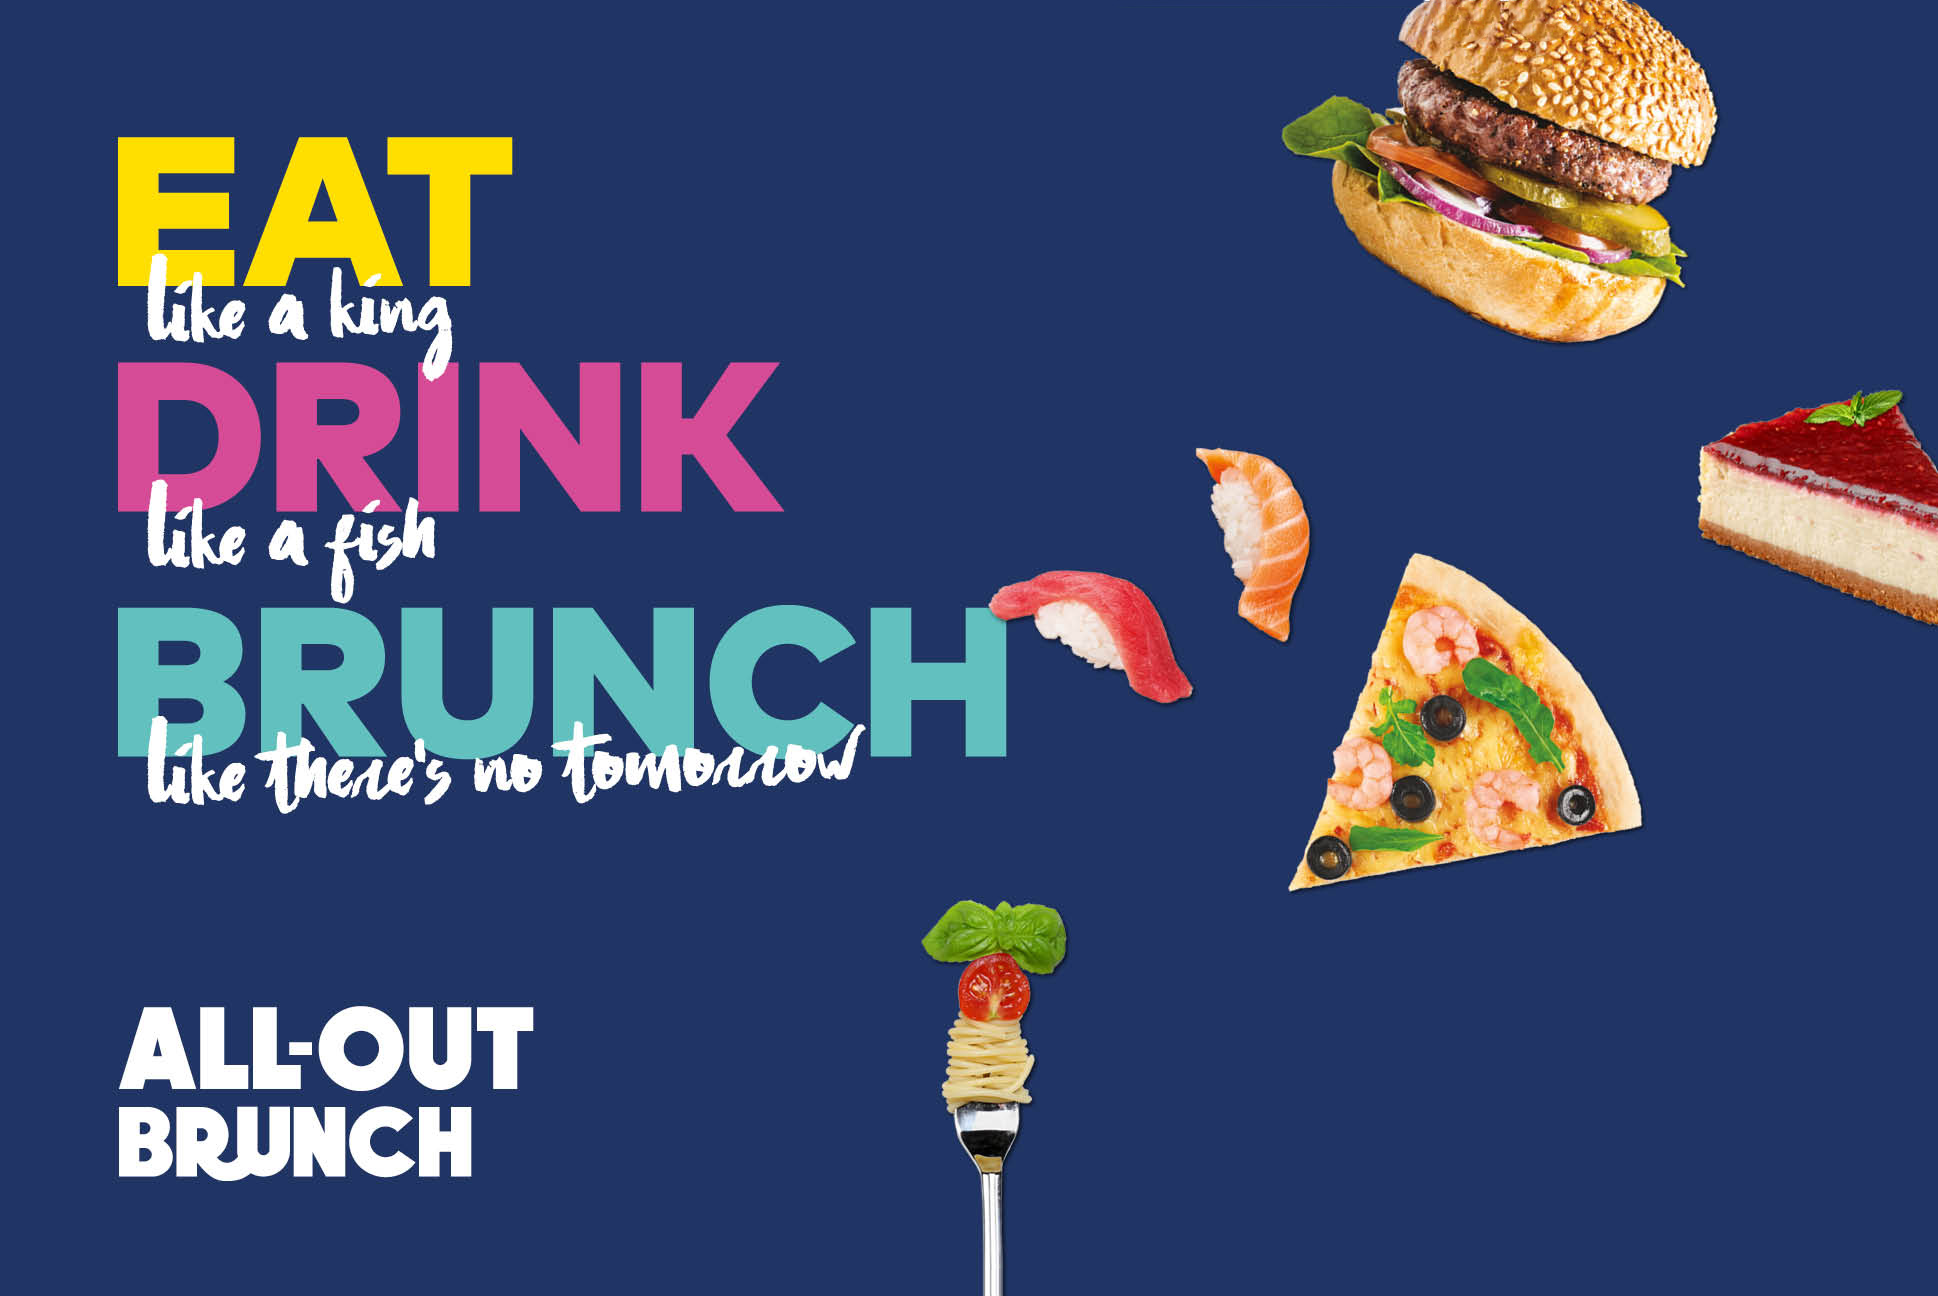 All-out Brunch Poster | Amwaj Rotana | Independent Marketing Campaign & Advertising Services | IM London